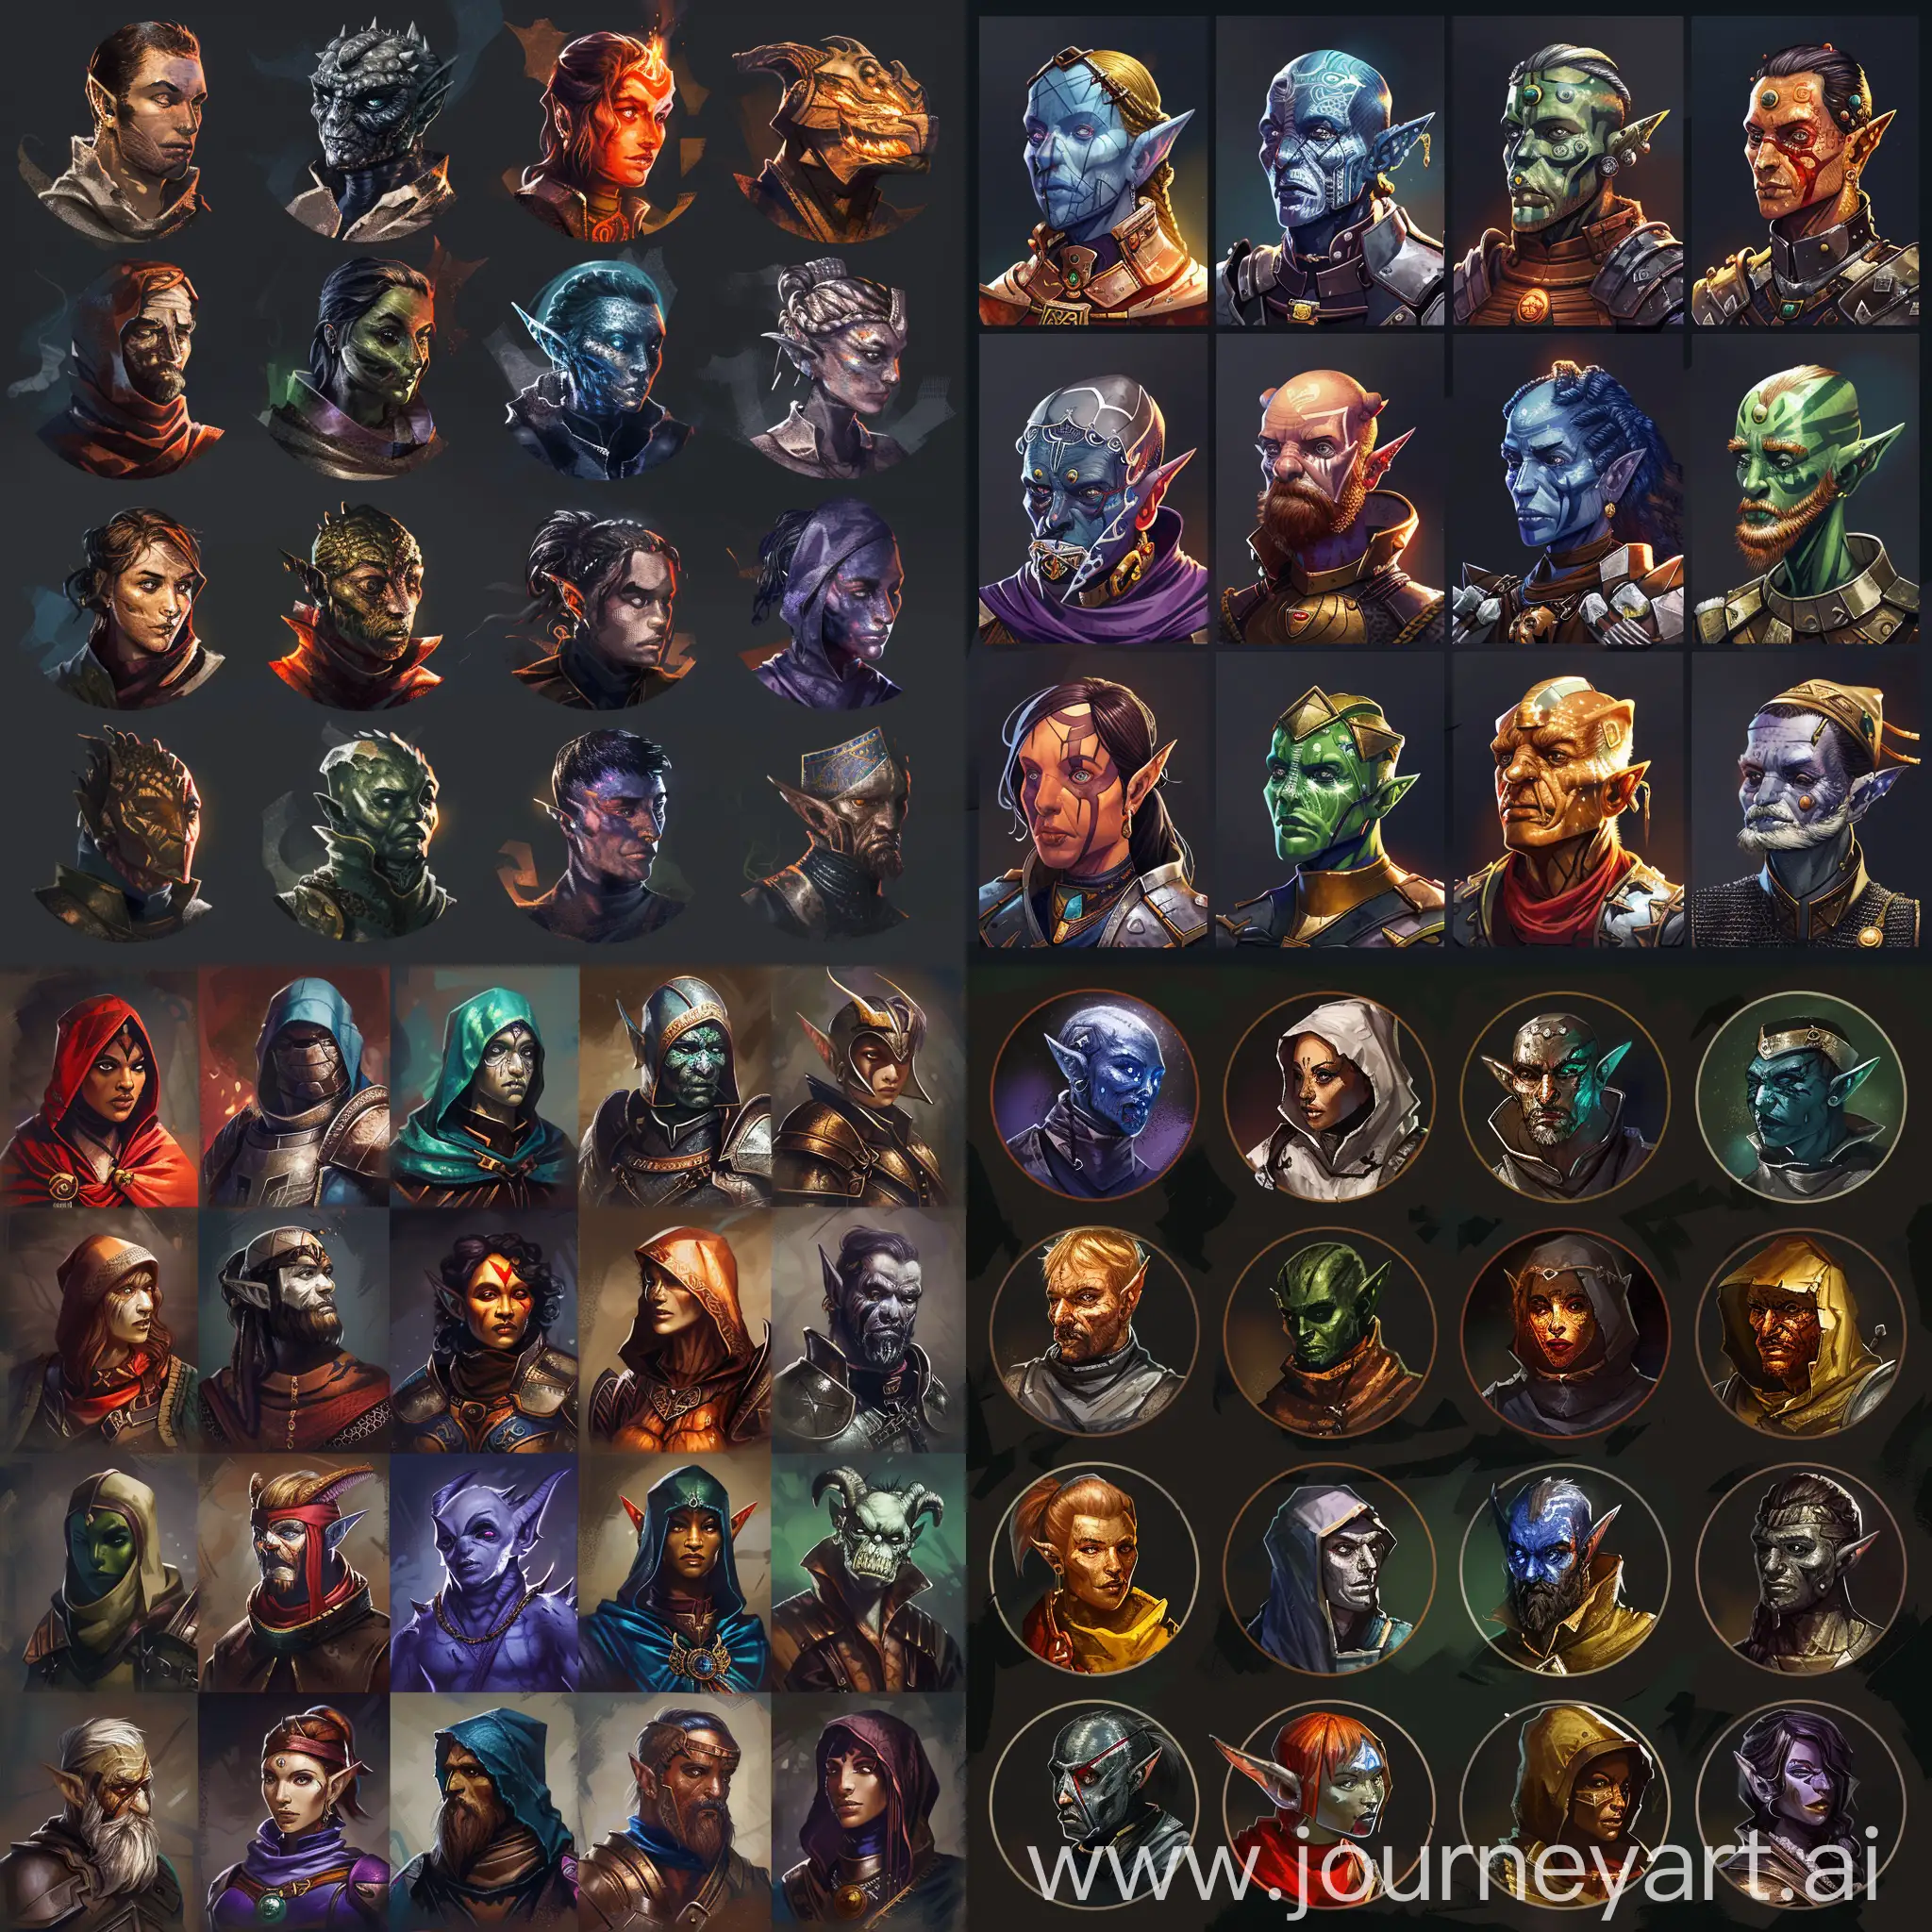 Fantasy-RPG-Character-Portraits-with-Diverse-Golems-in-Pathfinder-Style